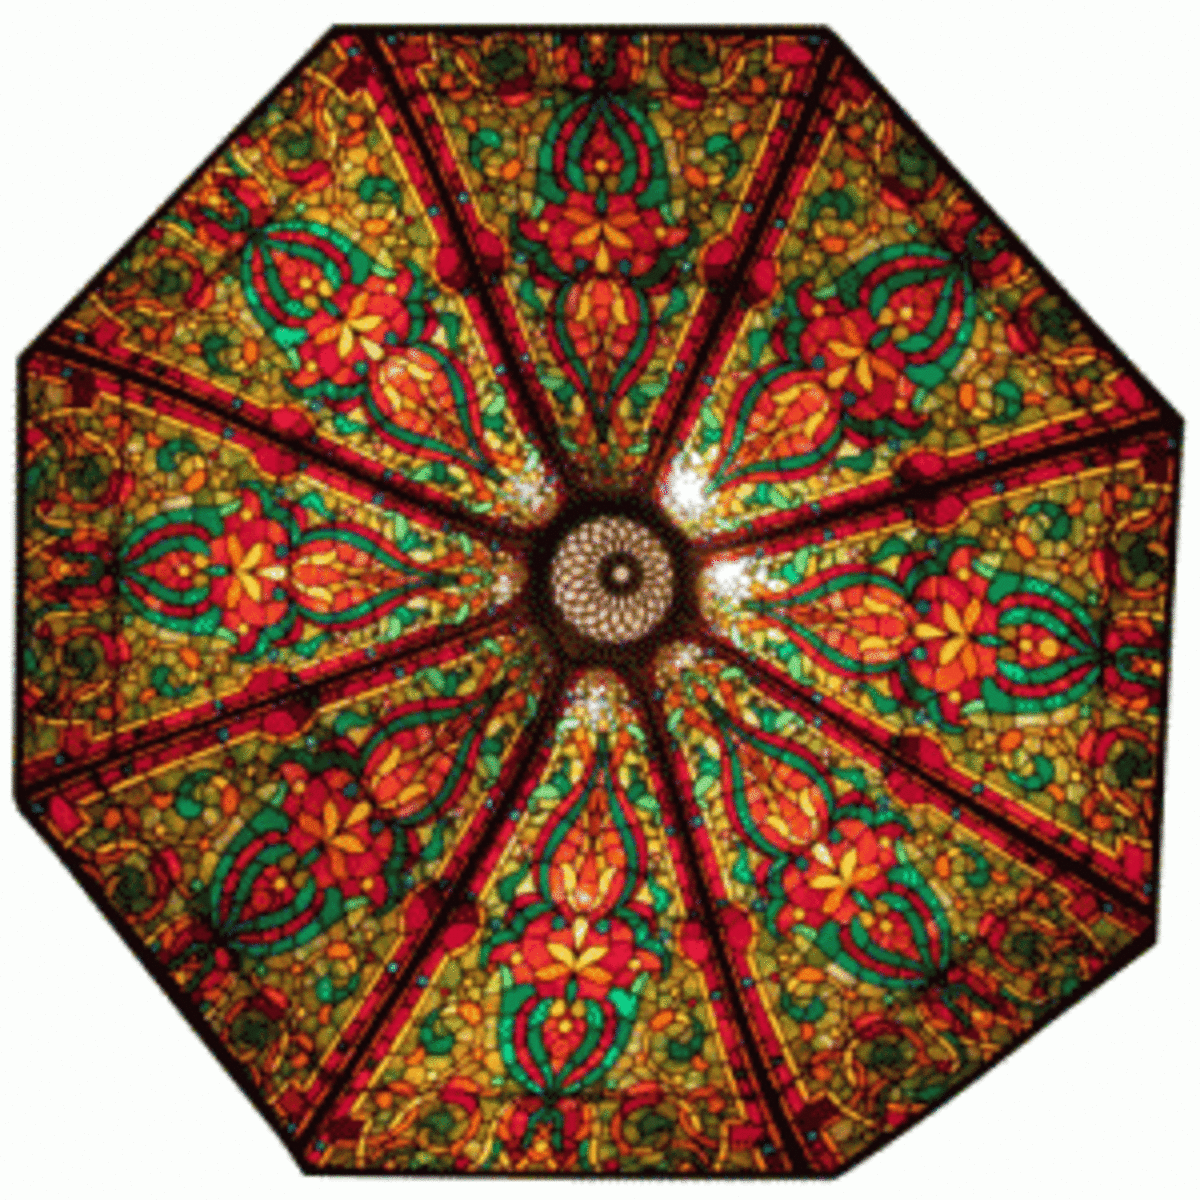 Leaded glass ceiling dome